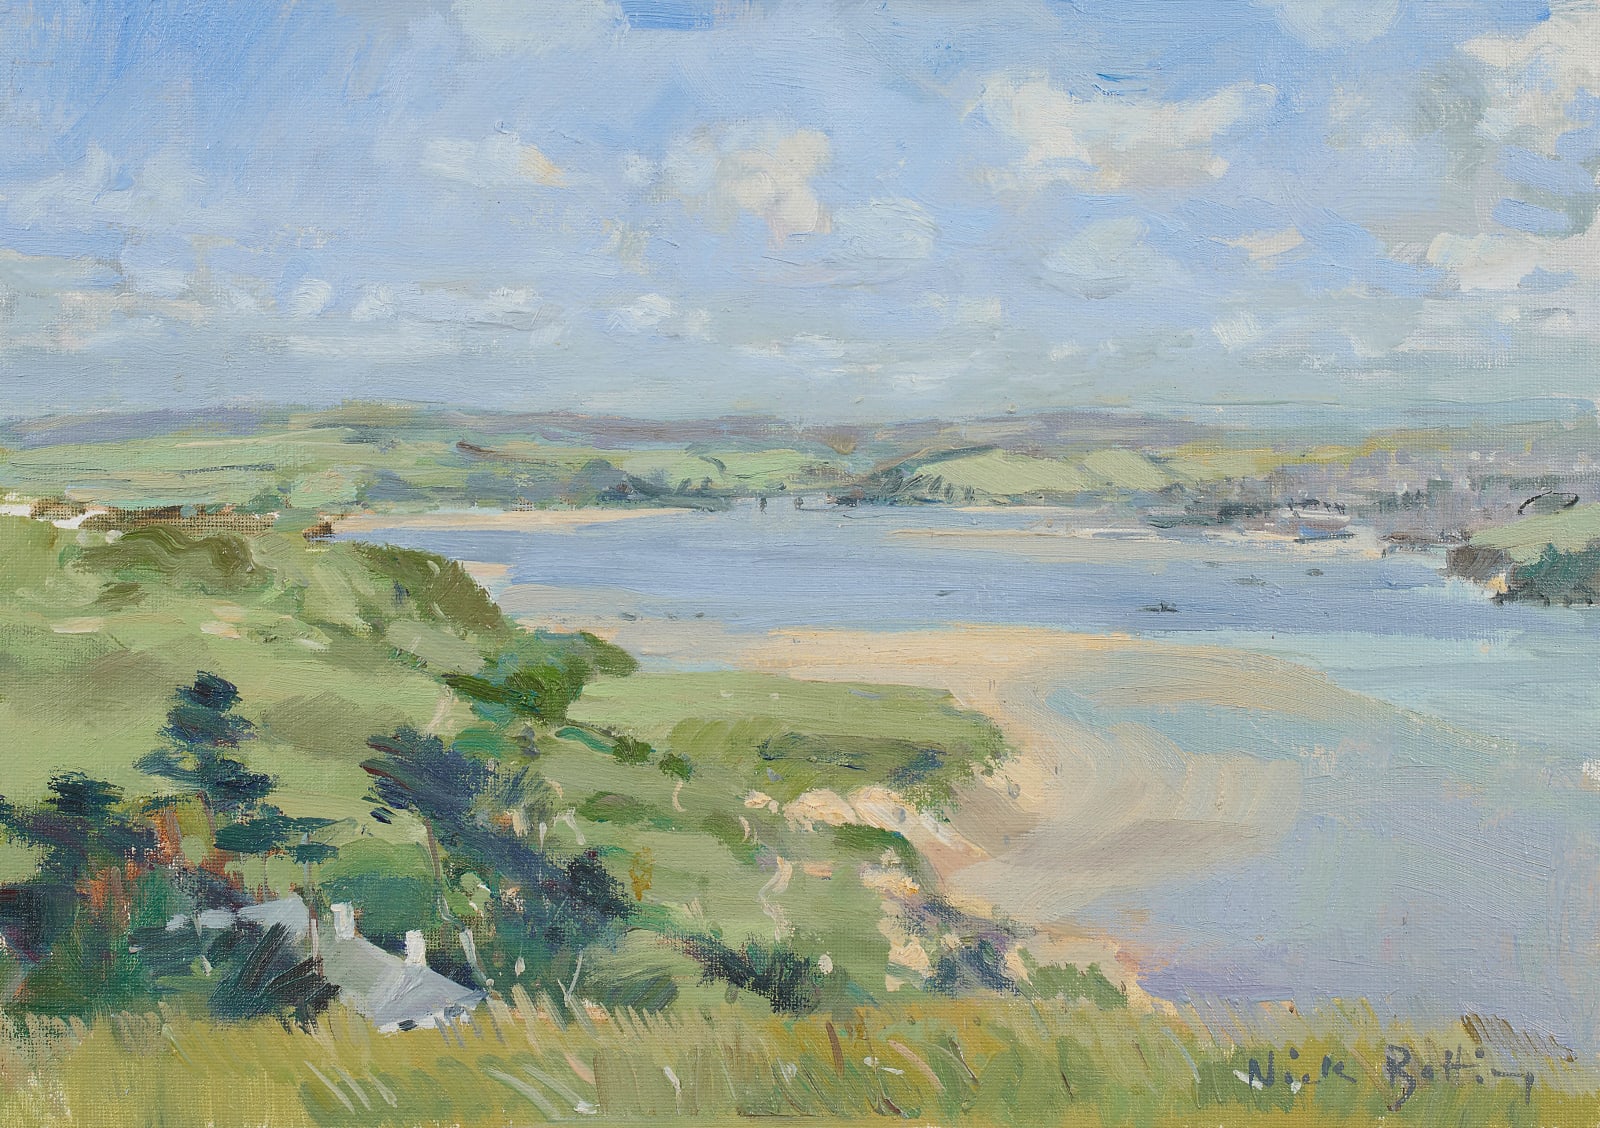 Nick Botting, 63. Panorama, The Camel Estuary from Brea Hill